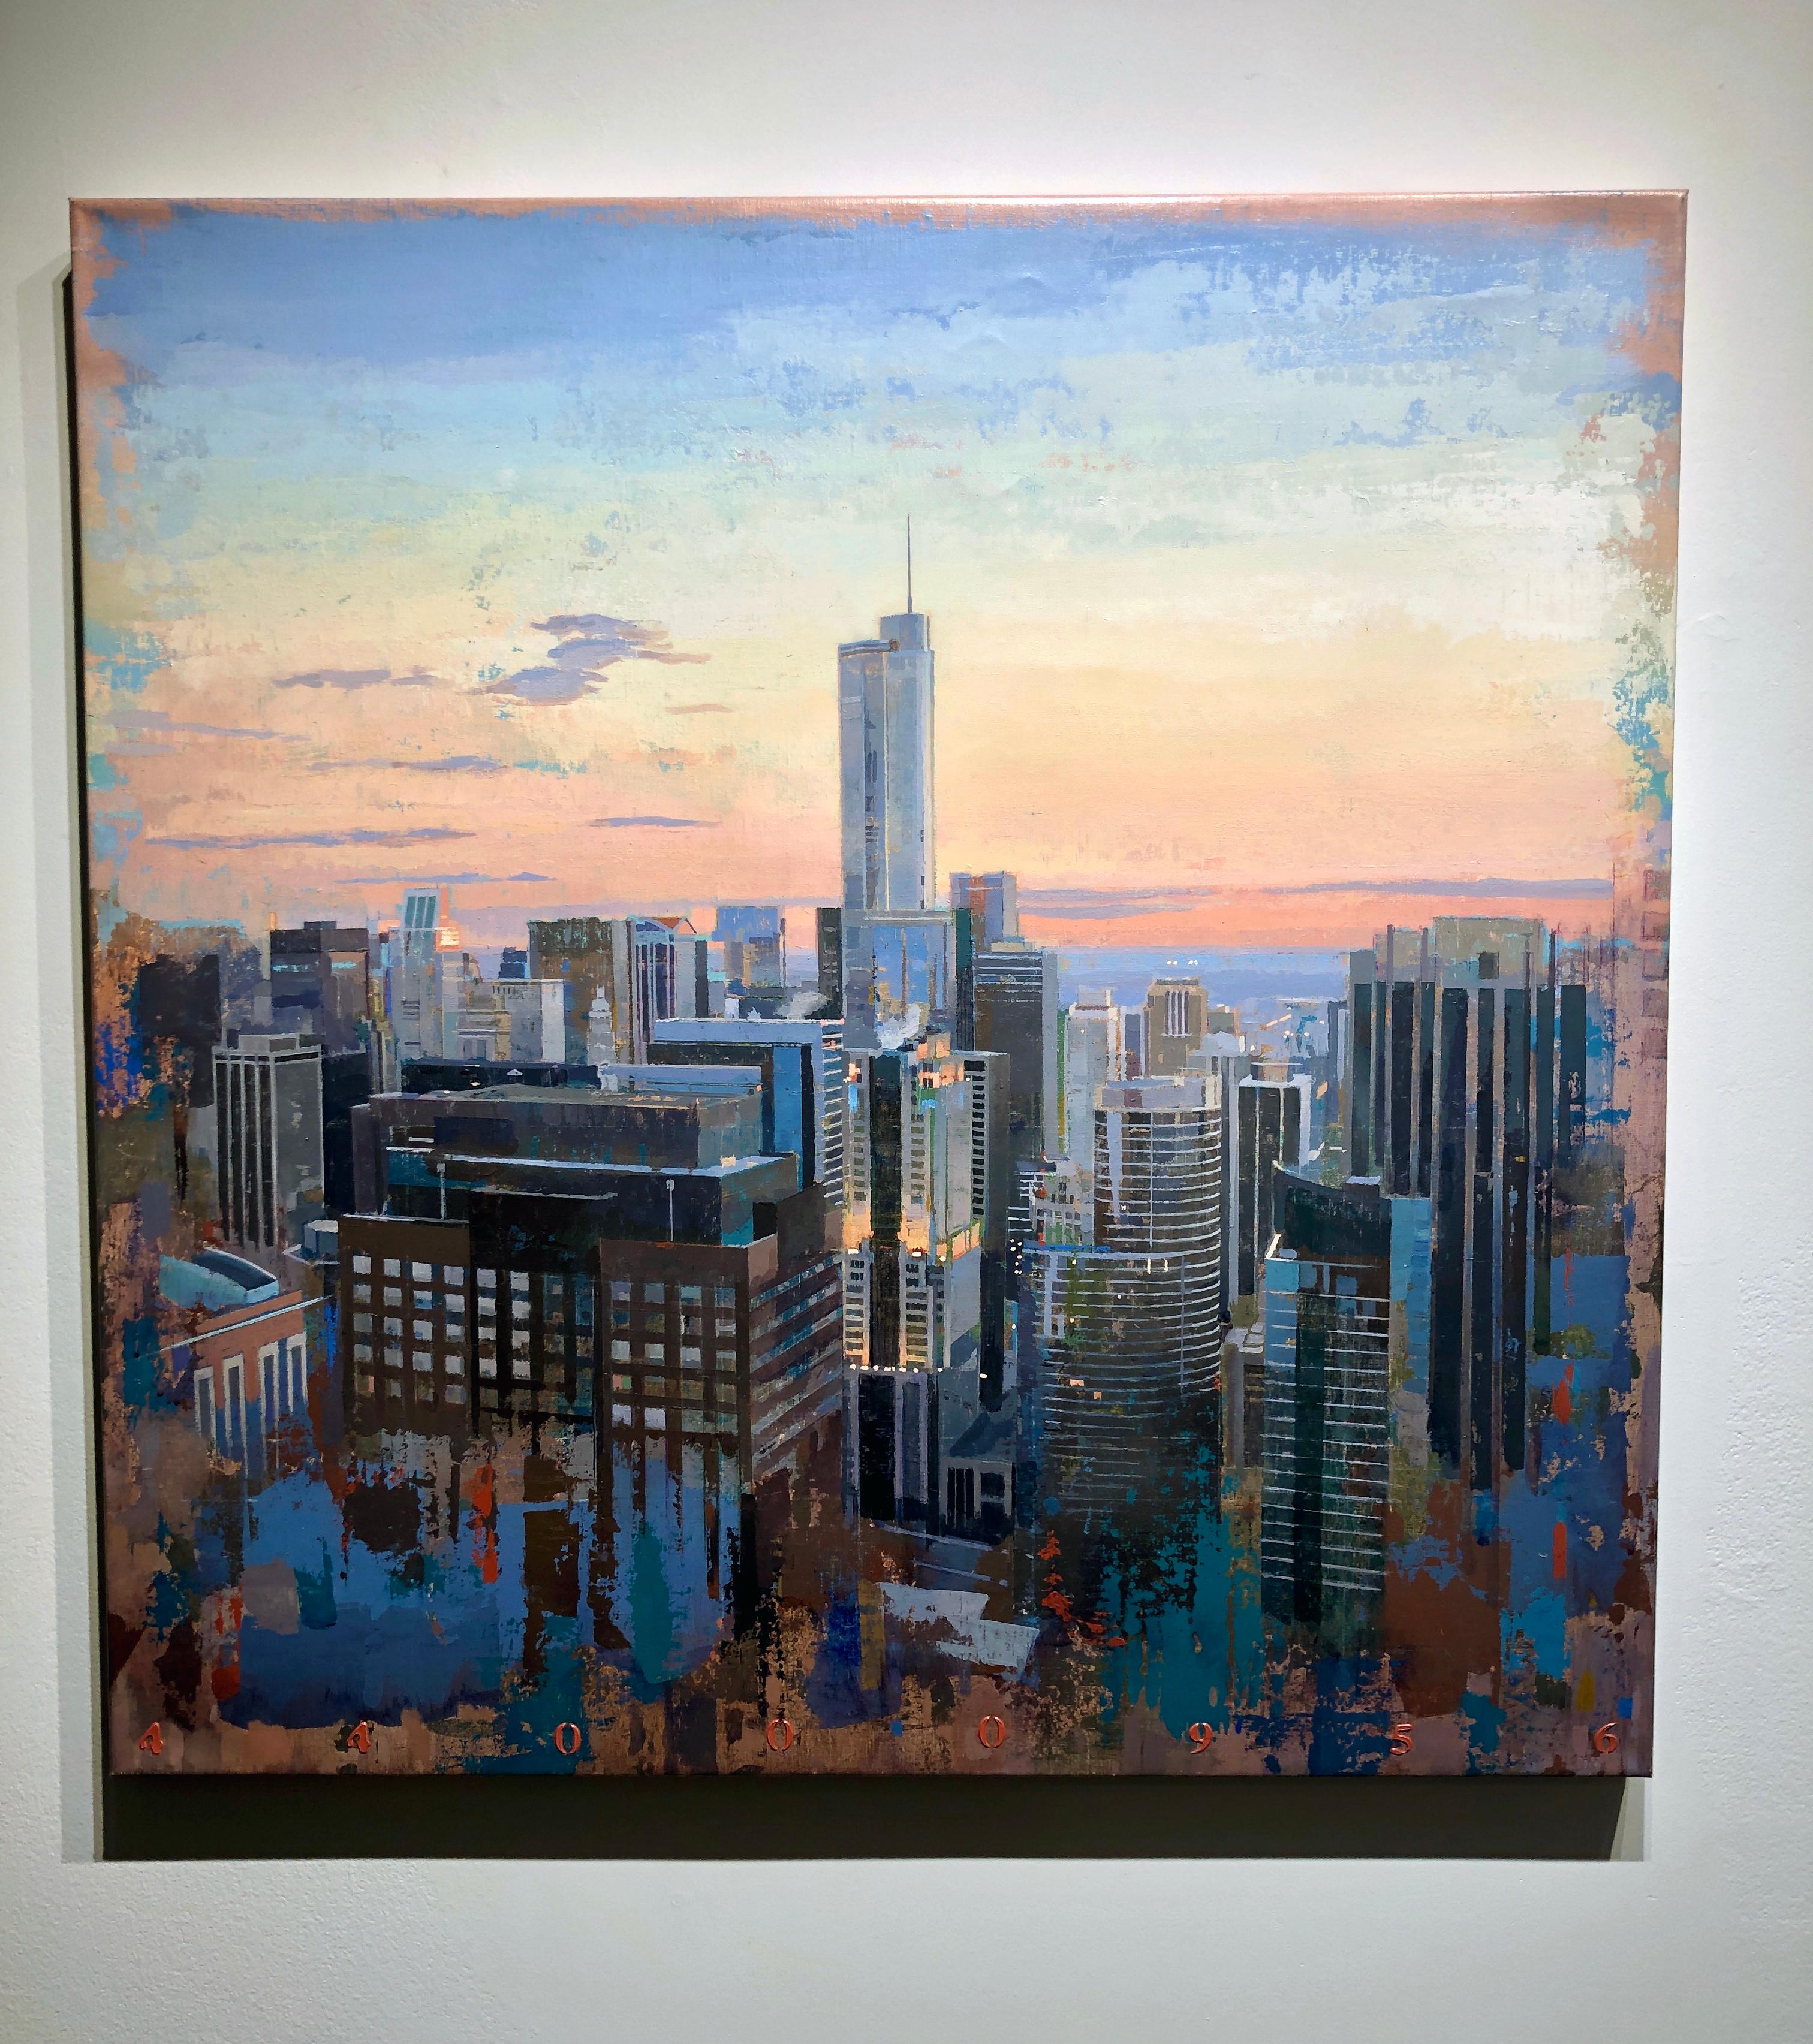 I Know Everything - Birds Eye View of Chicago Looking East, Oil & Acrylic - Contemporary Painting by Albert Vidal Moreno